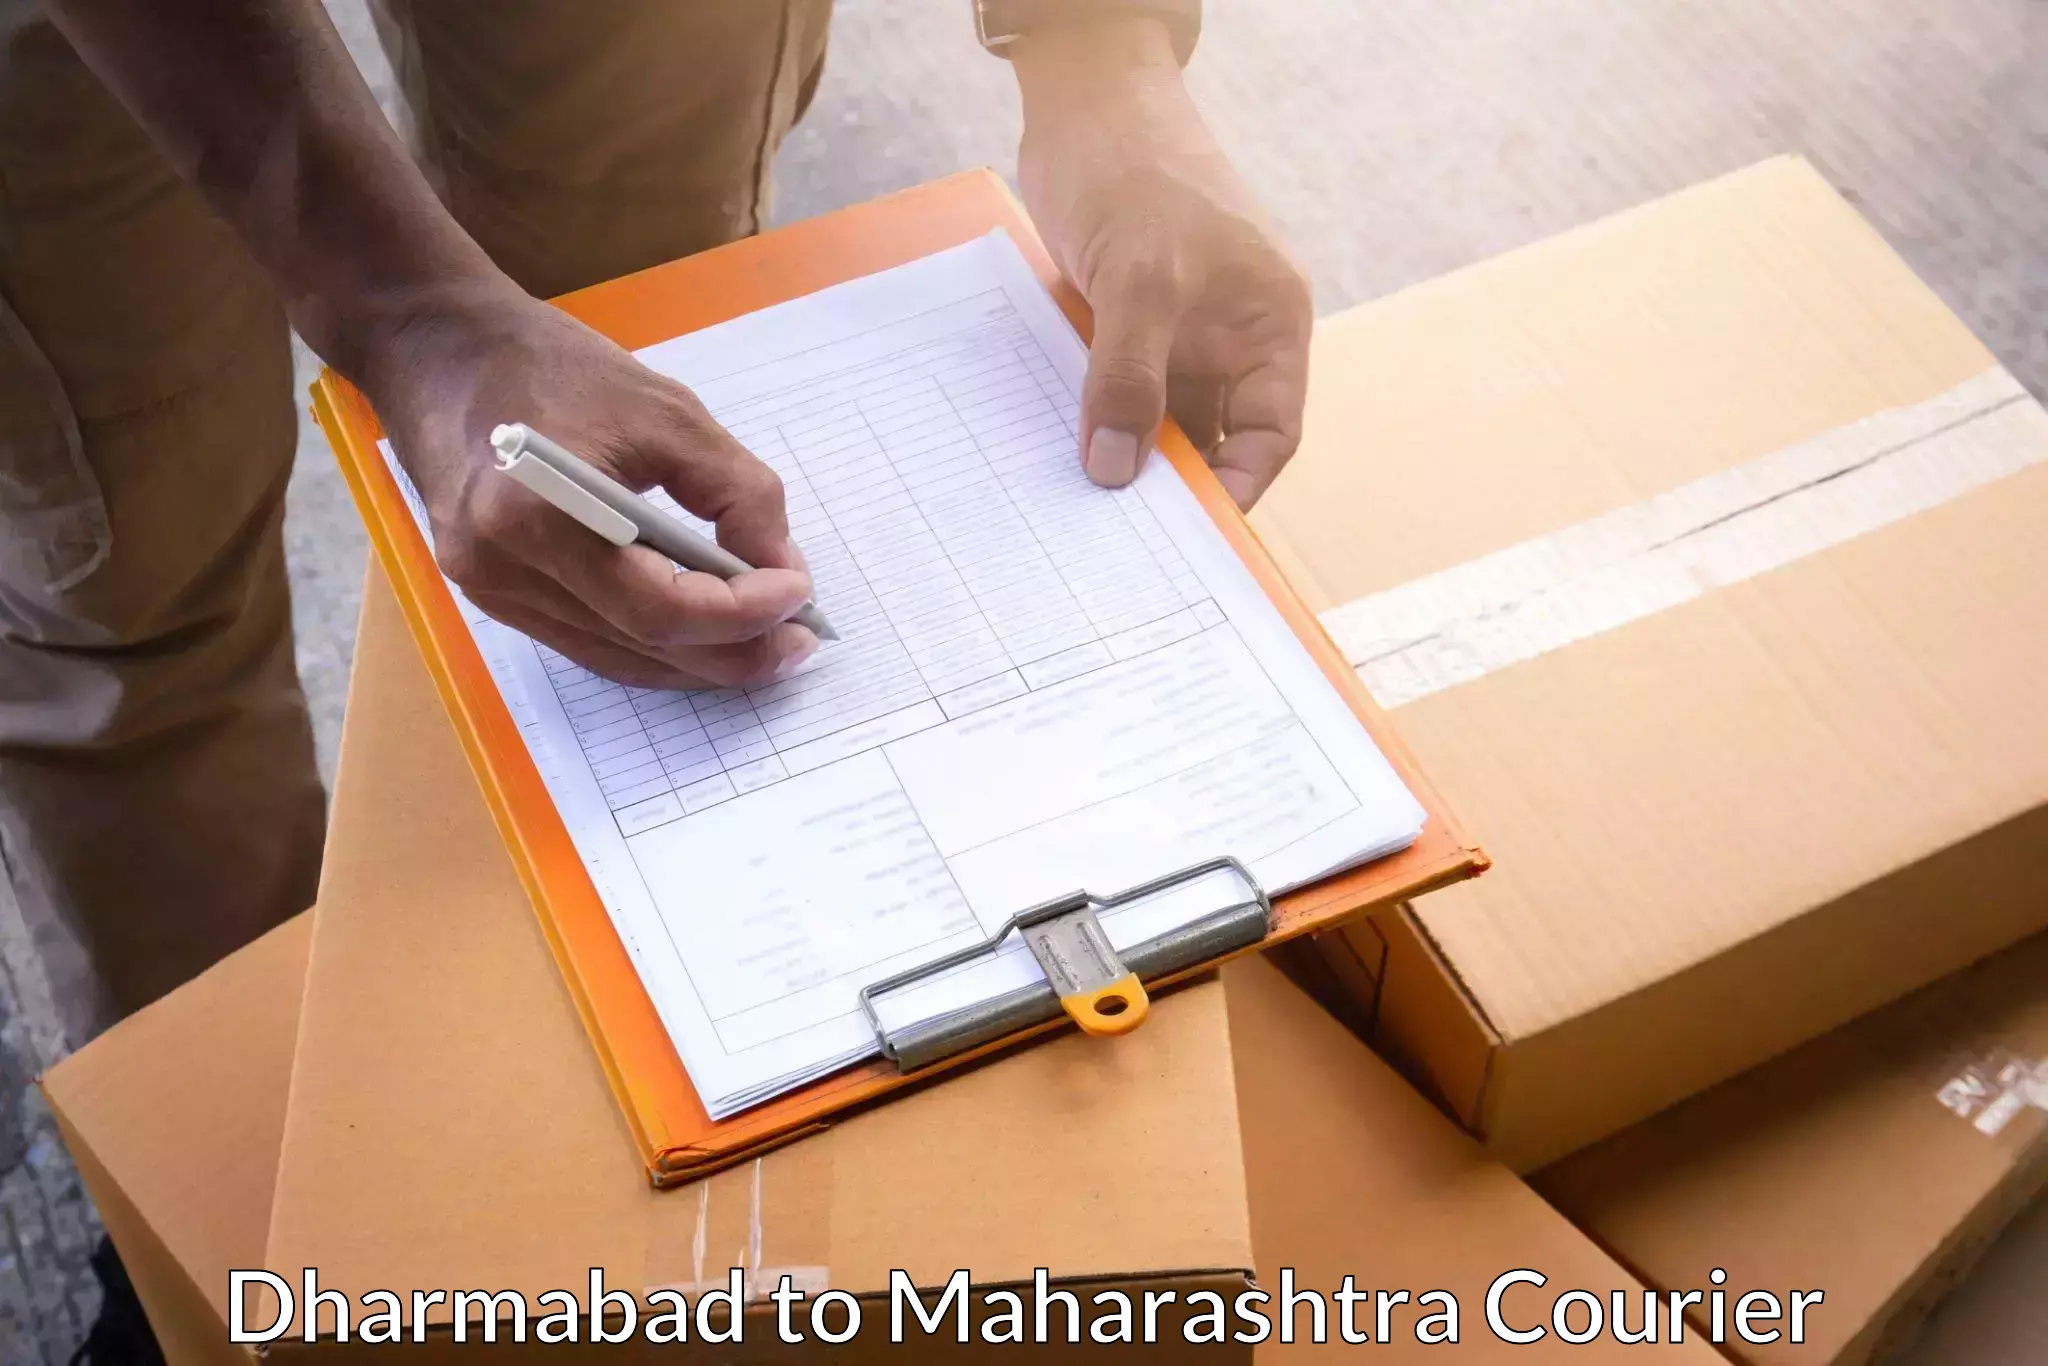 Courier service comparison Dharmabad to Sangameshwar